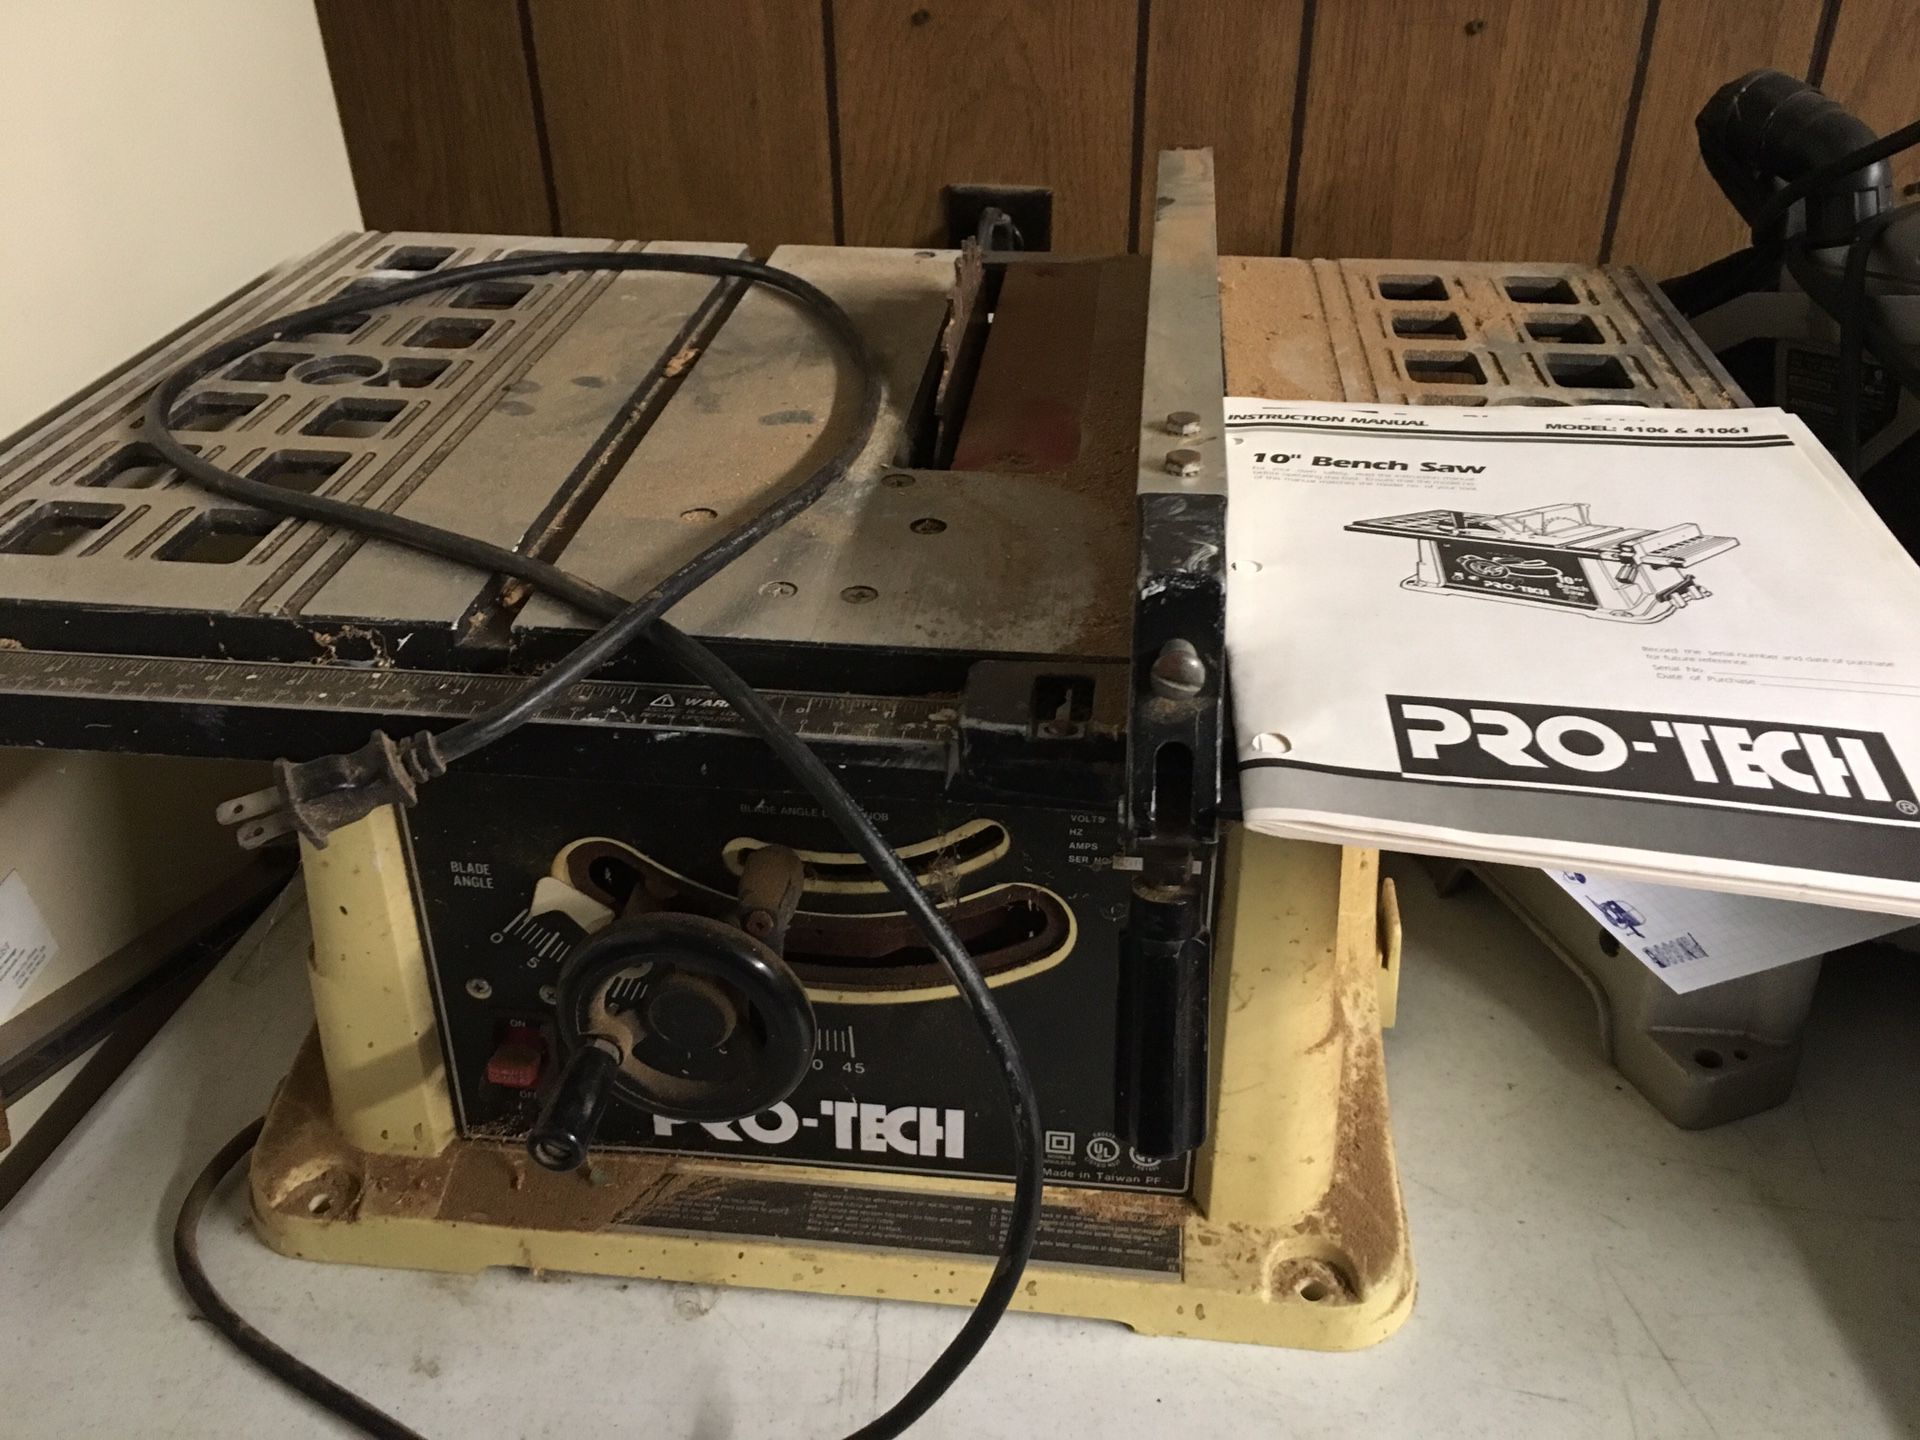 ProTech 10” Table Saw